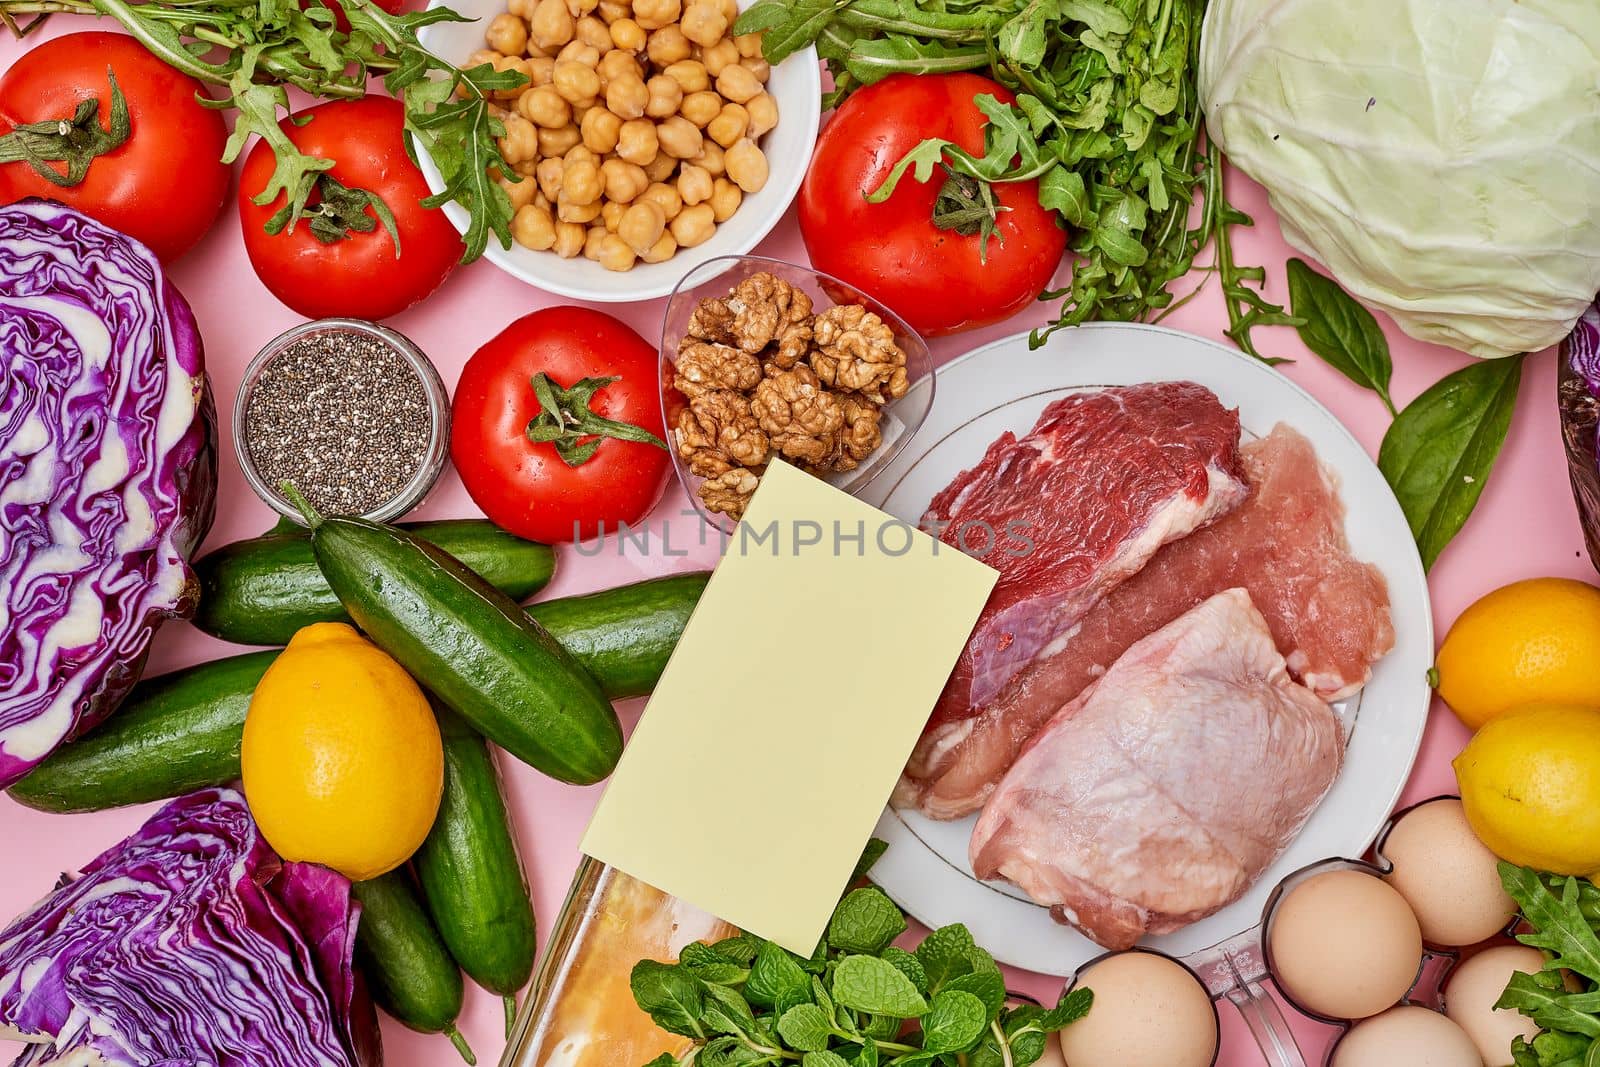 some food that is on a pink surface with vegetables, eggs, tomatoes, and other foods in the background